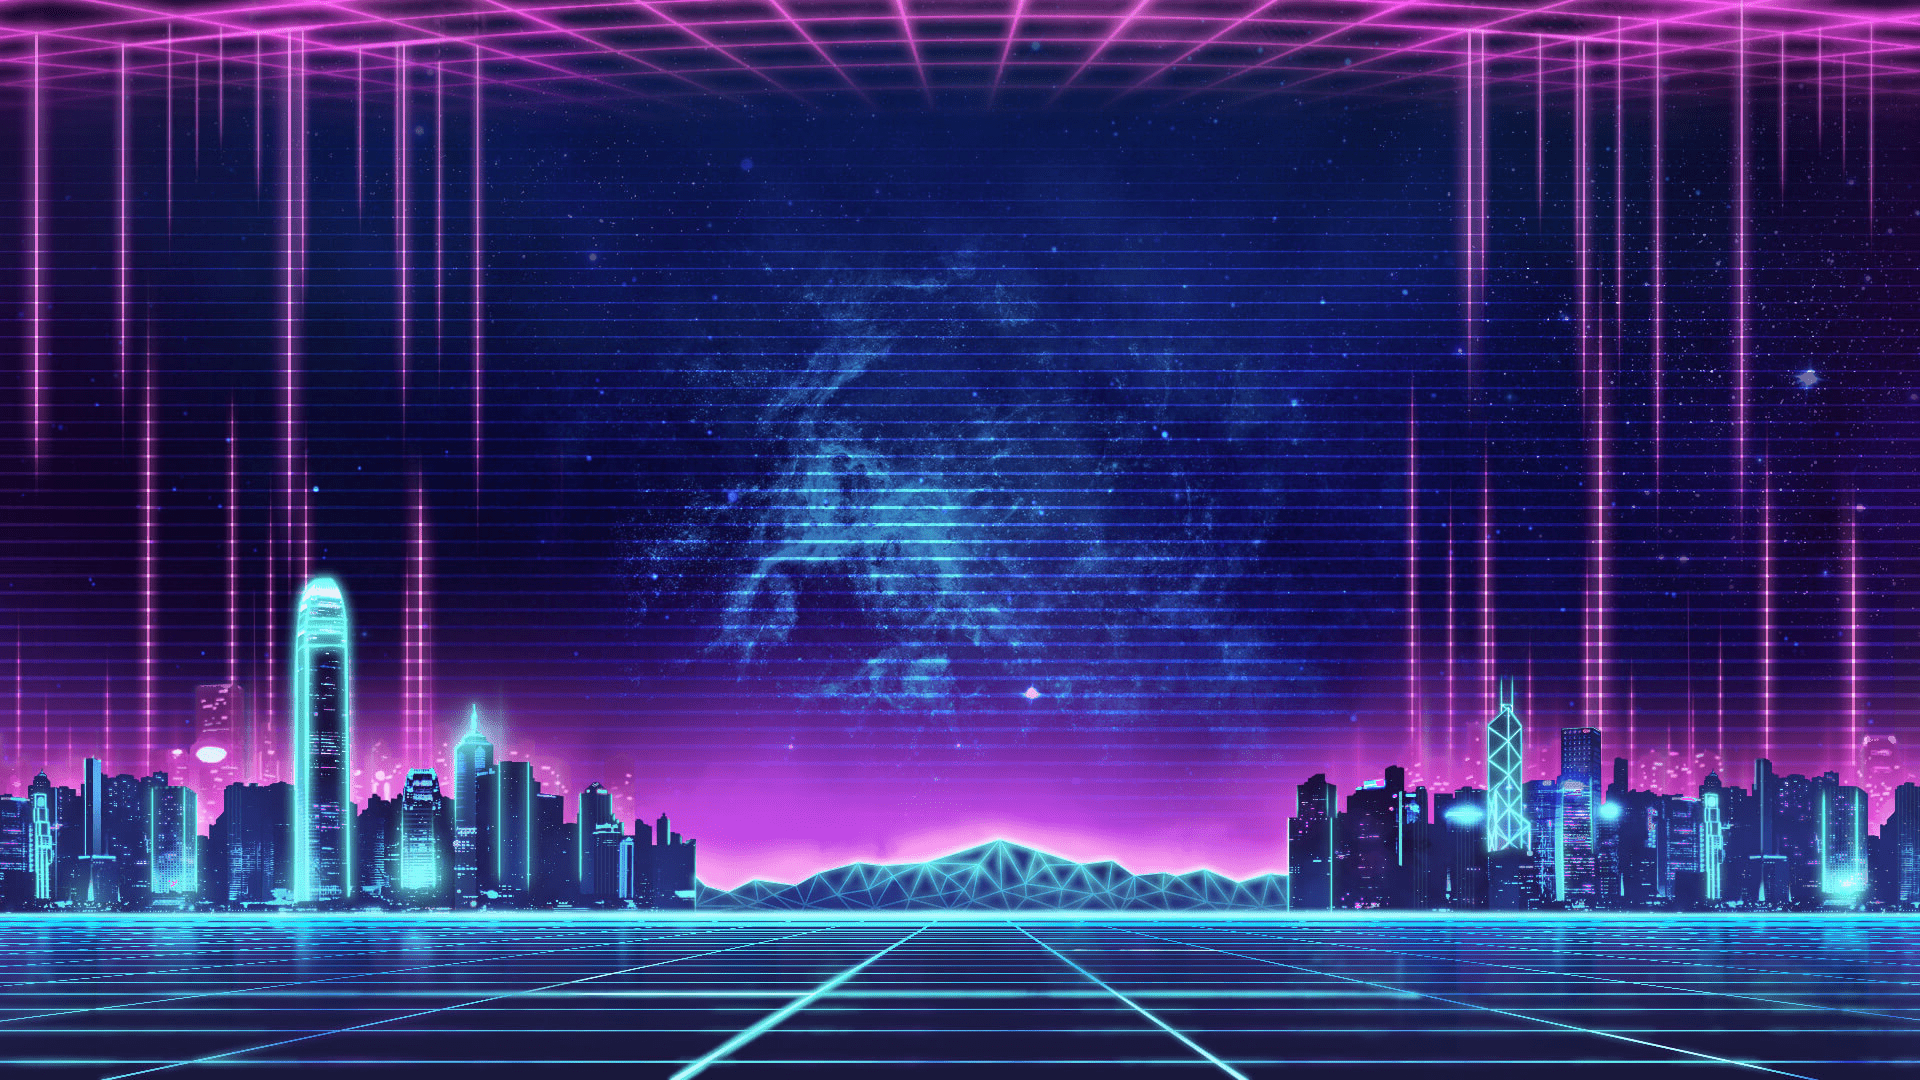 Free download Synthwave Music Retro Neon City Neon wallpaper Synthwave [1920x1080] for your Desktop, Mobile & Tablet. Explore Retro Aesthetic City Wallpaper. Retro Desktop Wallpaper, Retro Wallpaper, Retro Arcade Wallpaper